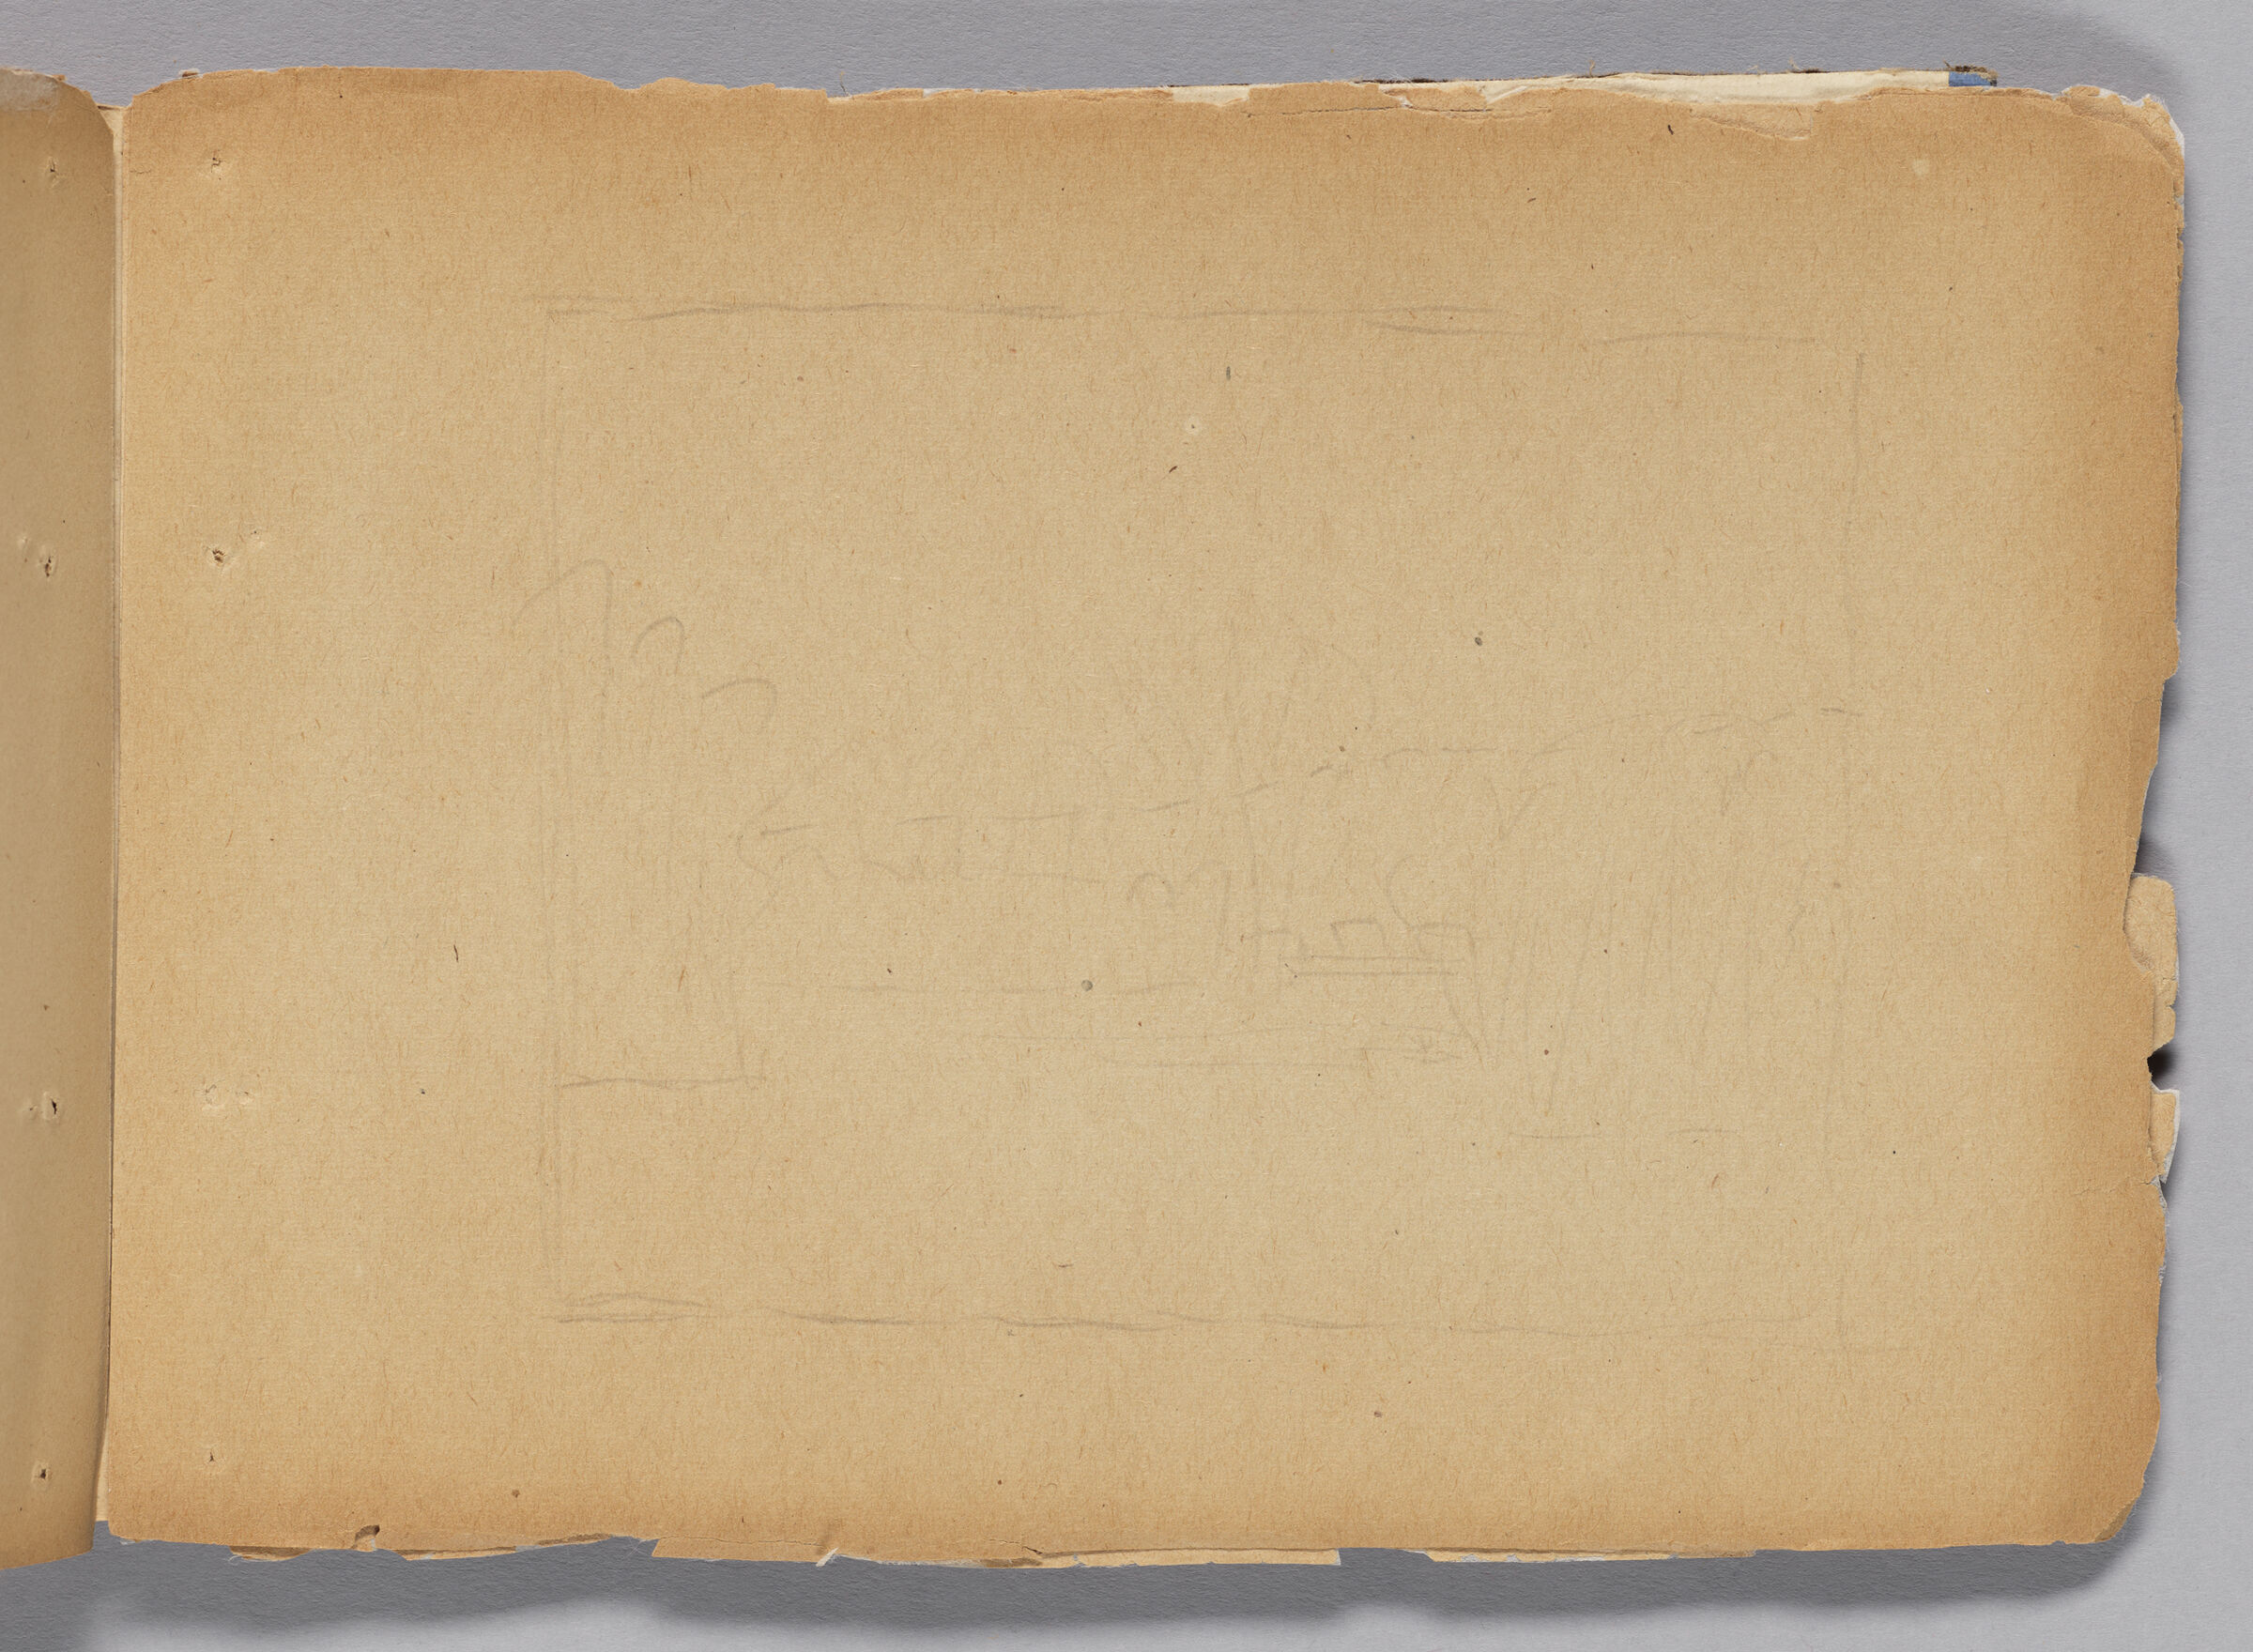 Untitled (Blank With Stray Marks, Left Page); Untitled (Faint Sketch Of Landscape, Right Page)